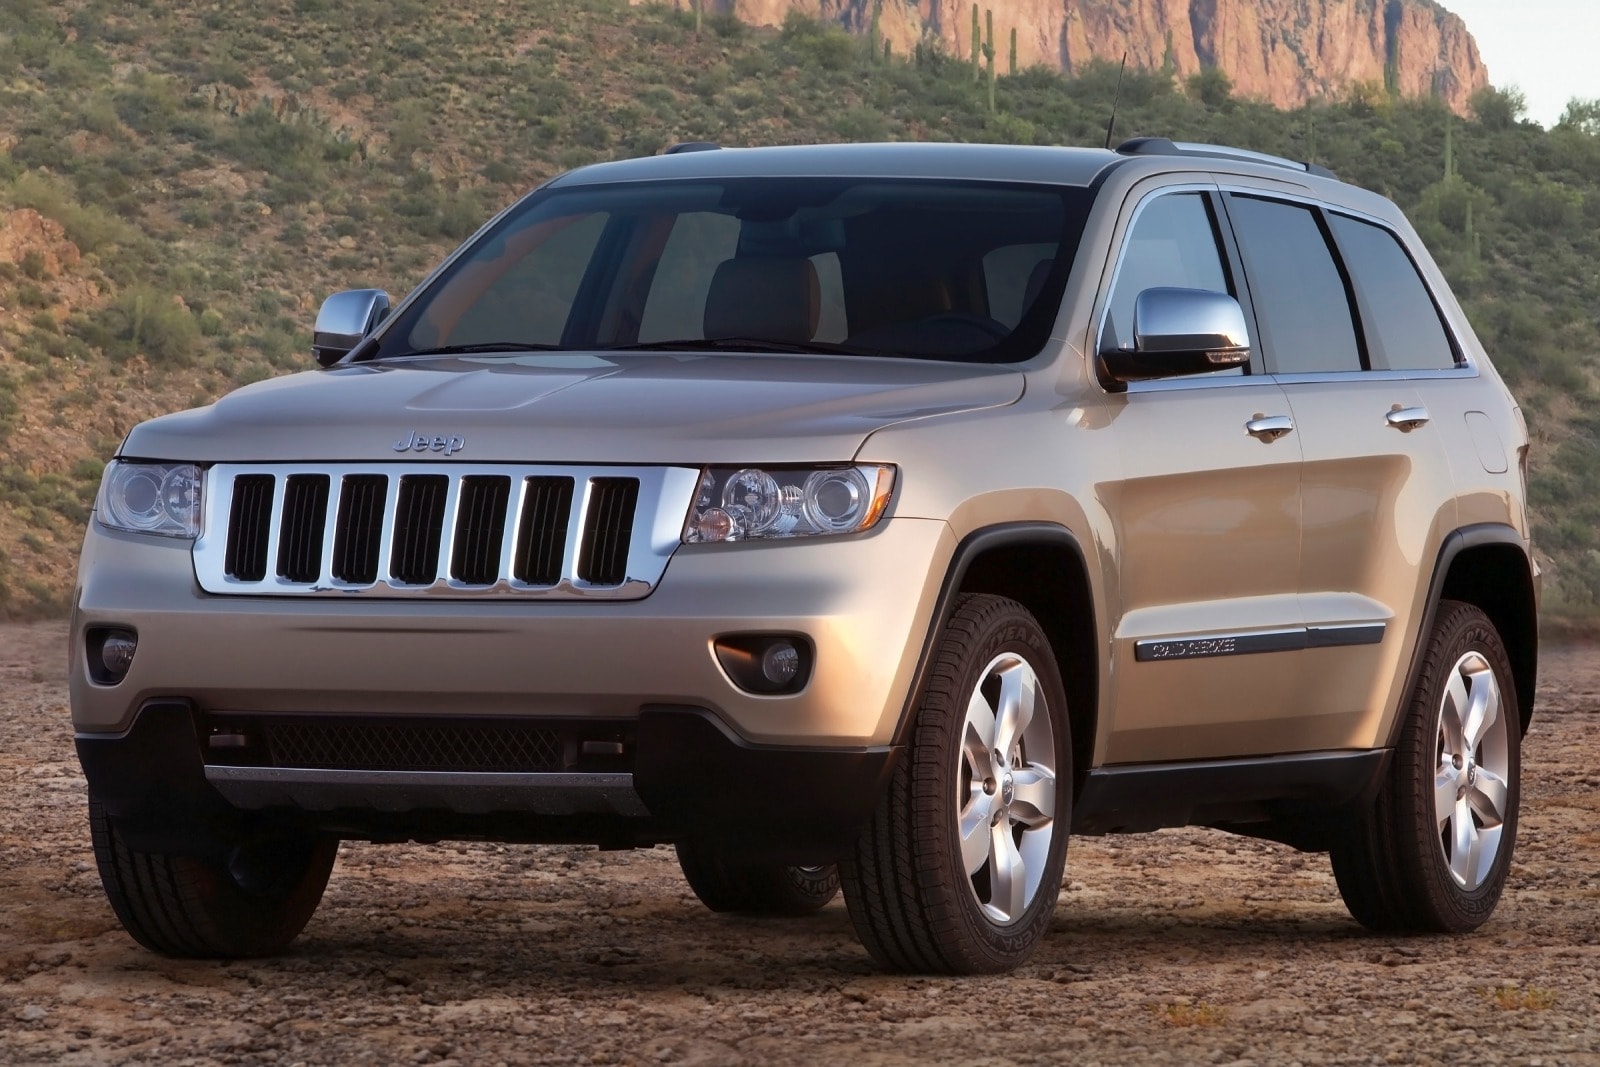 2013 Jeep Grand Cherokee Review & Ratings | Edmunds